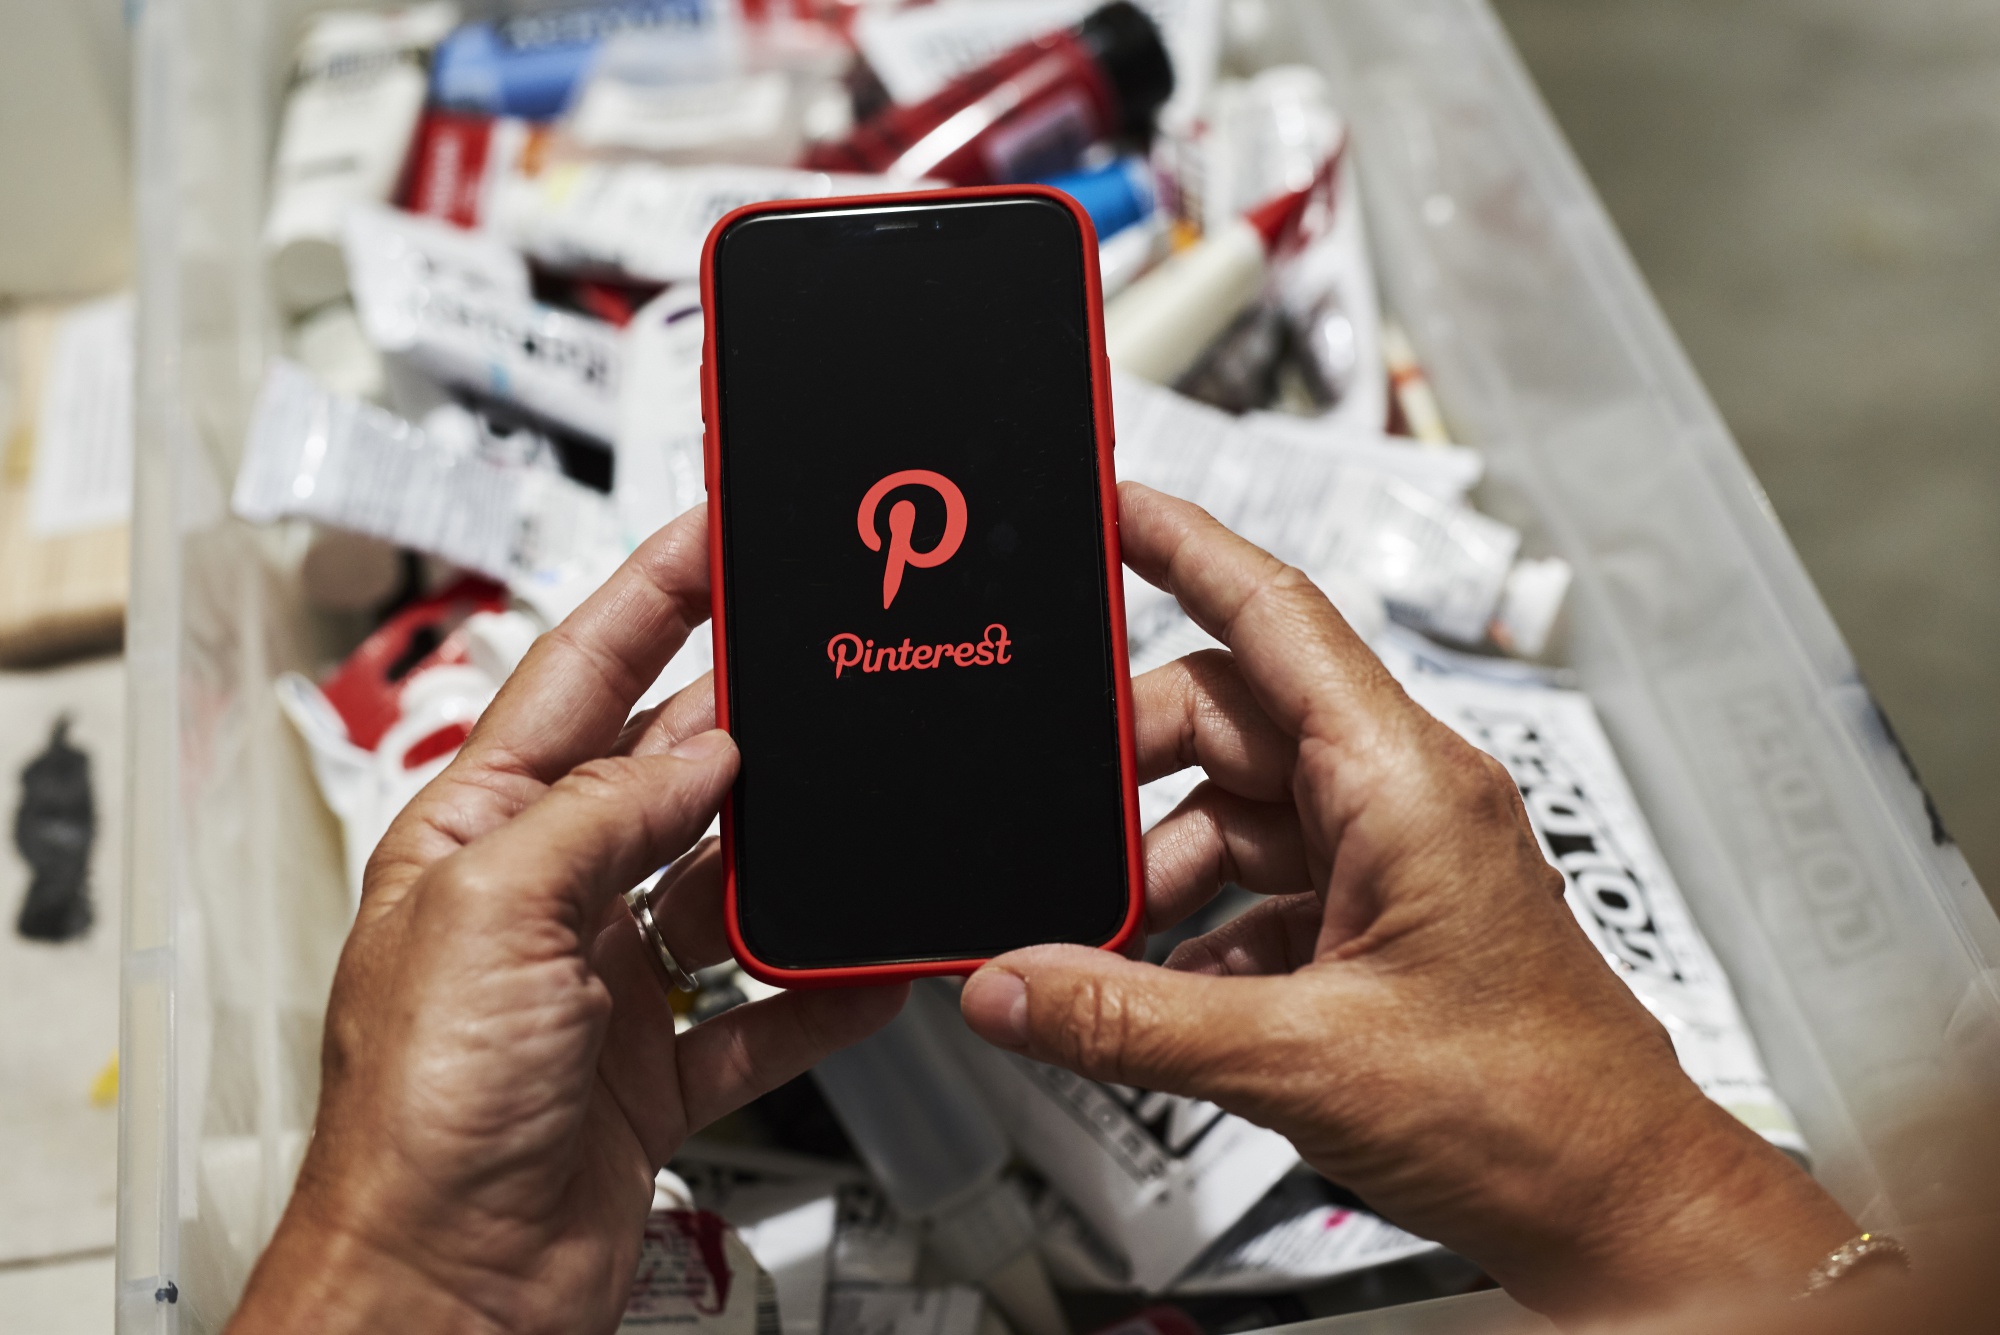 Pinterest Application As Company Said To File Confidentially For IPO 